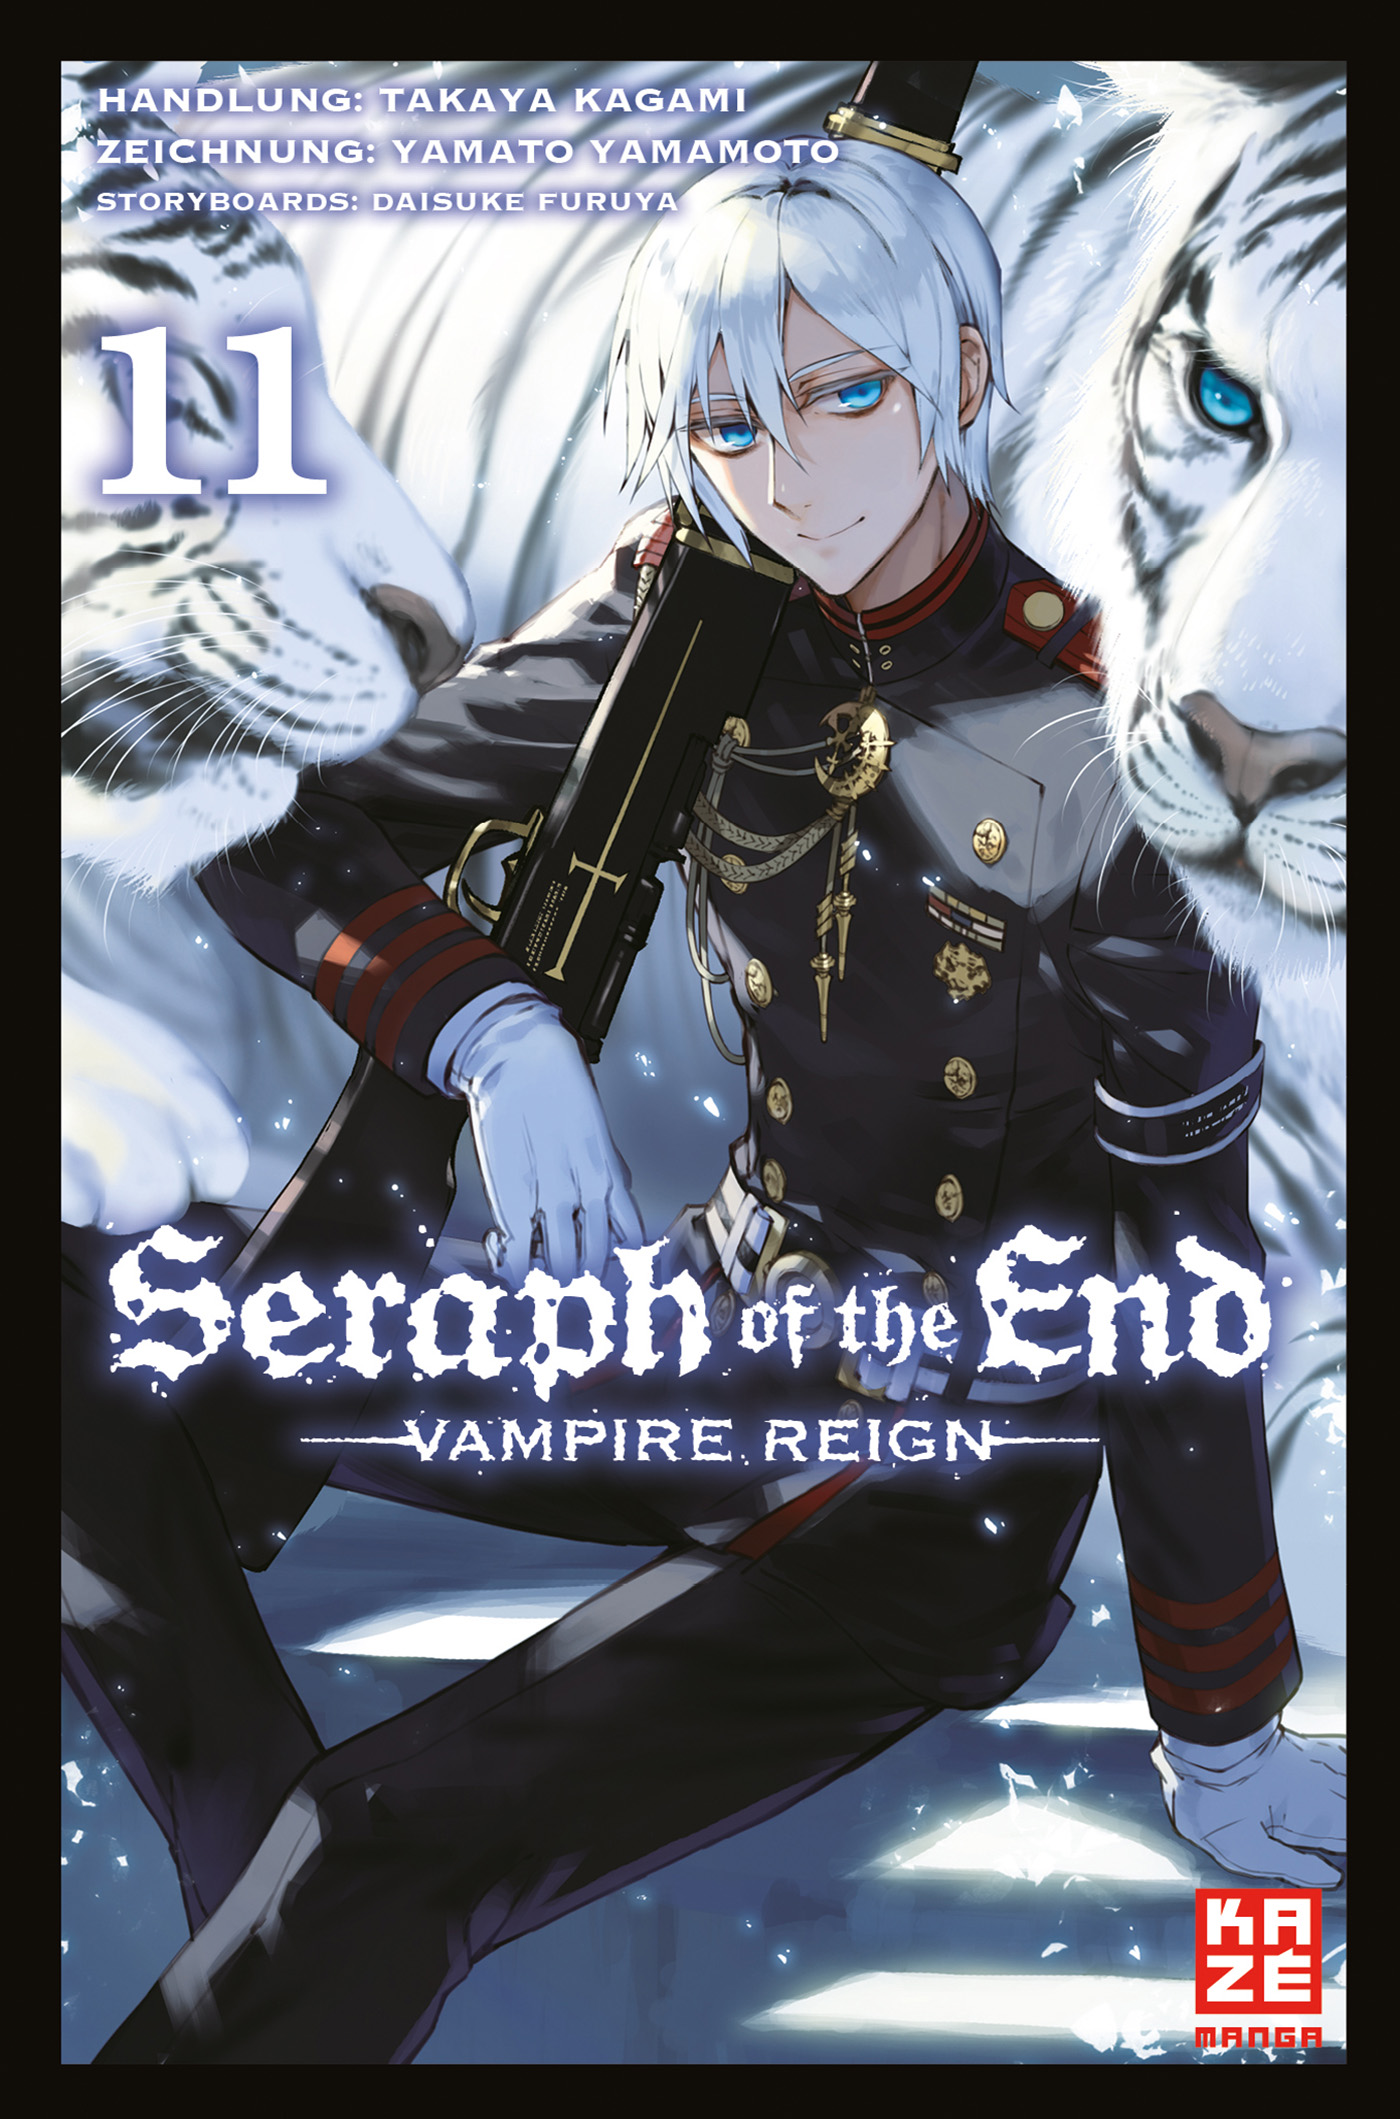 End 11 Seraph of – Band the